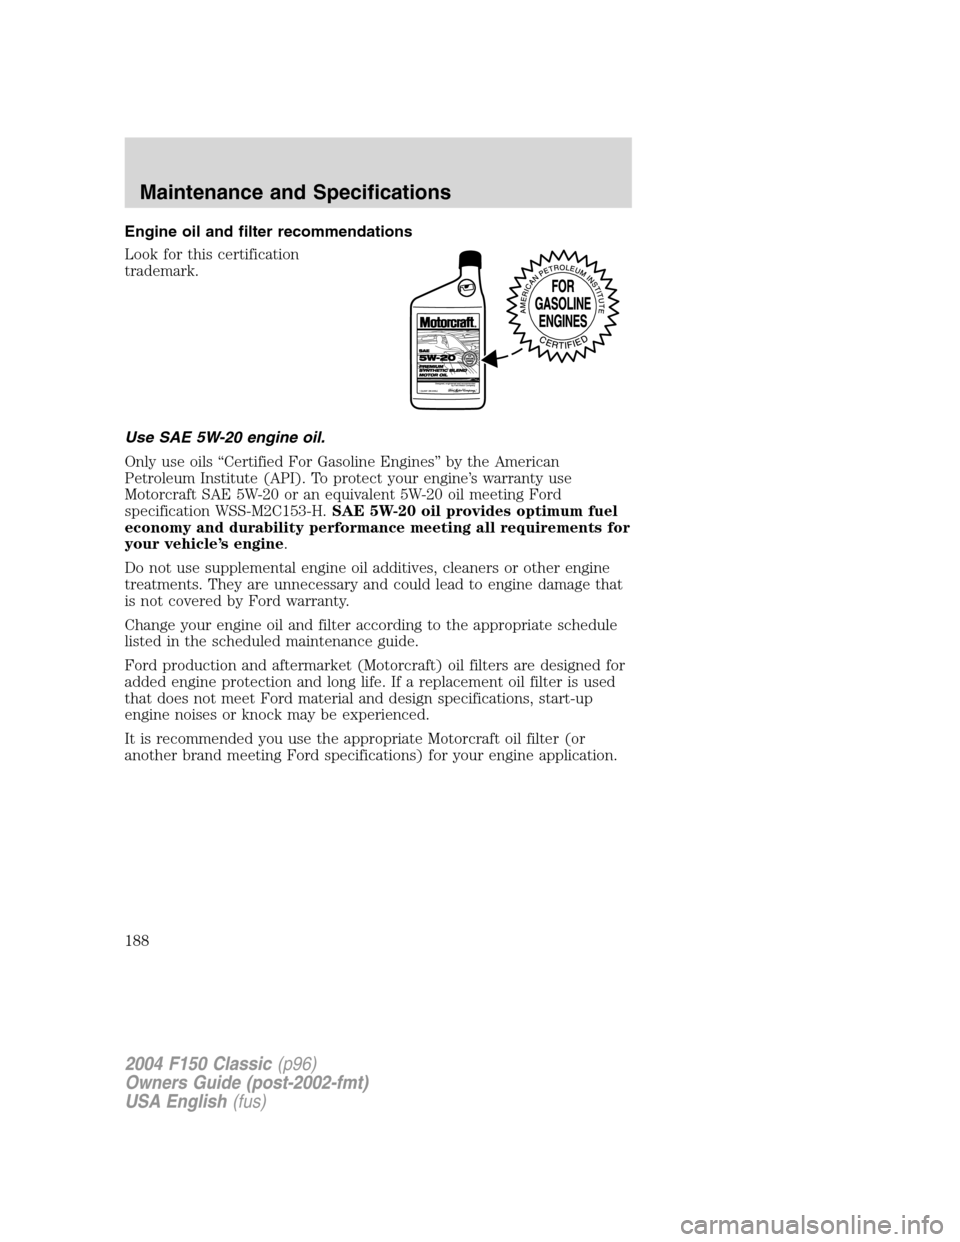 FORD F150 2004 11.G Herritage Owners Manual Engine oil and filter recommendations
Look for this certification
trademark.
Use SAE 5W-20 engine oil.
Only use oils“Certified For Gasoline Engines”by the American
Petroleum Institute (API). To pr